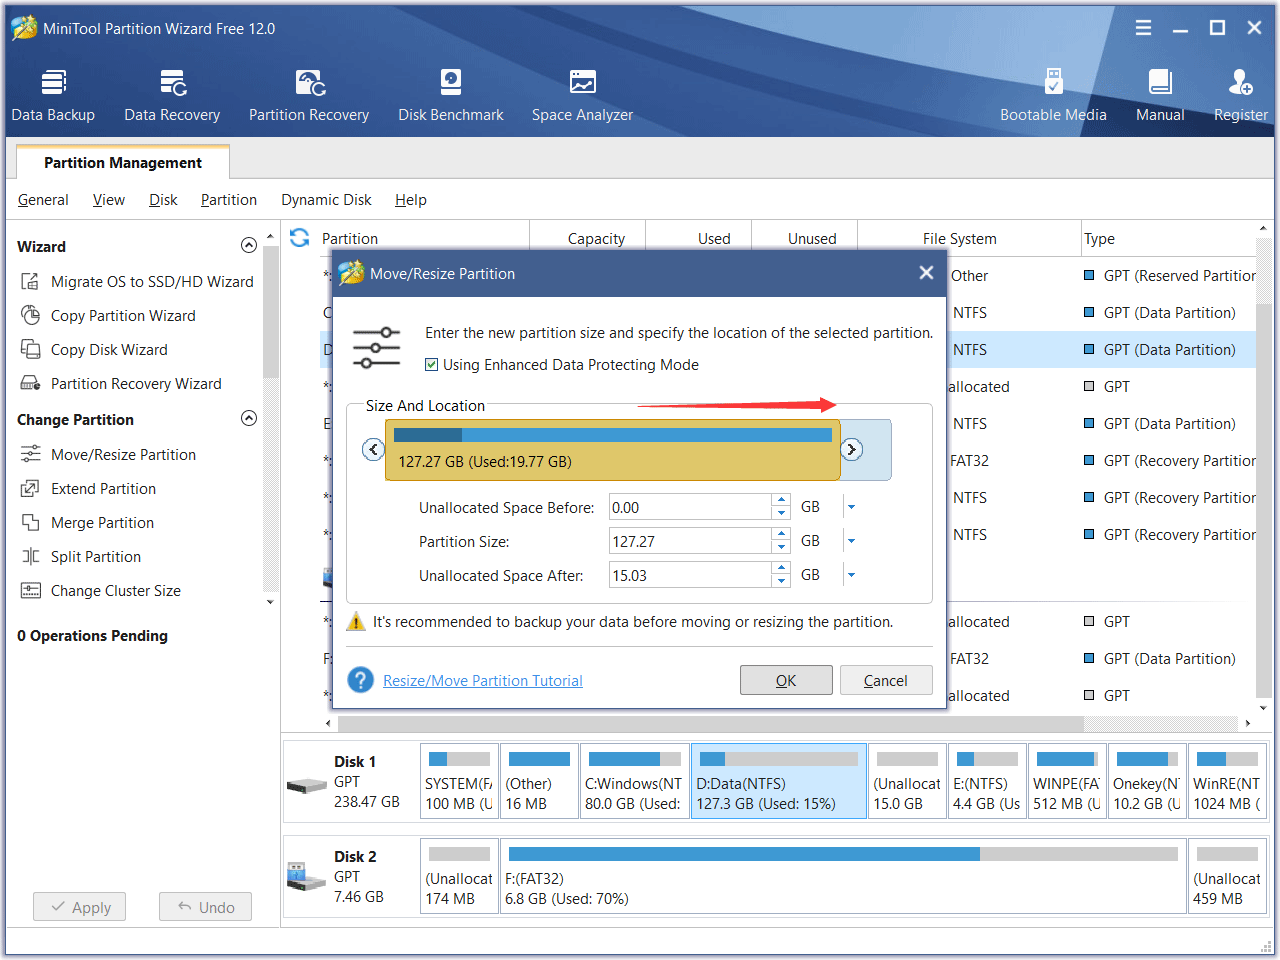 drag the slider to increase partition size